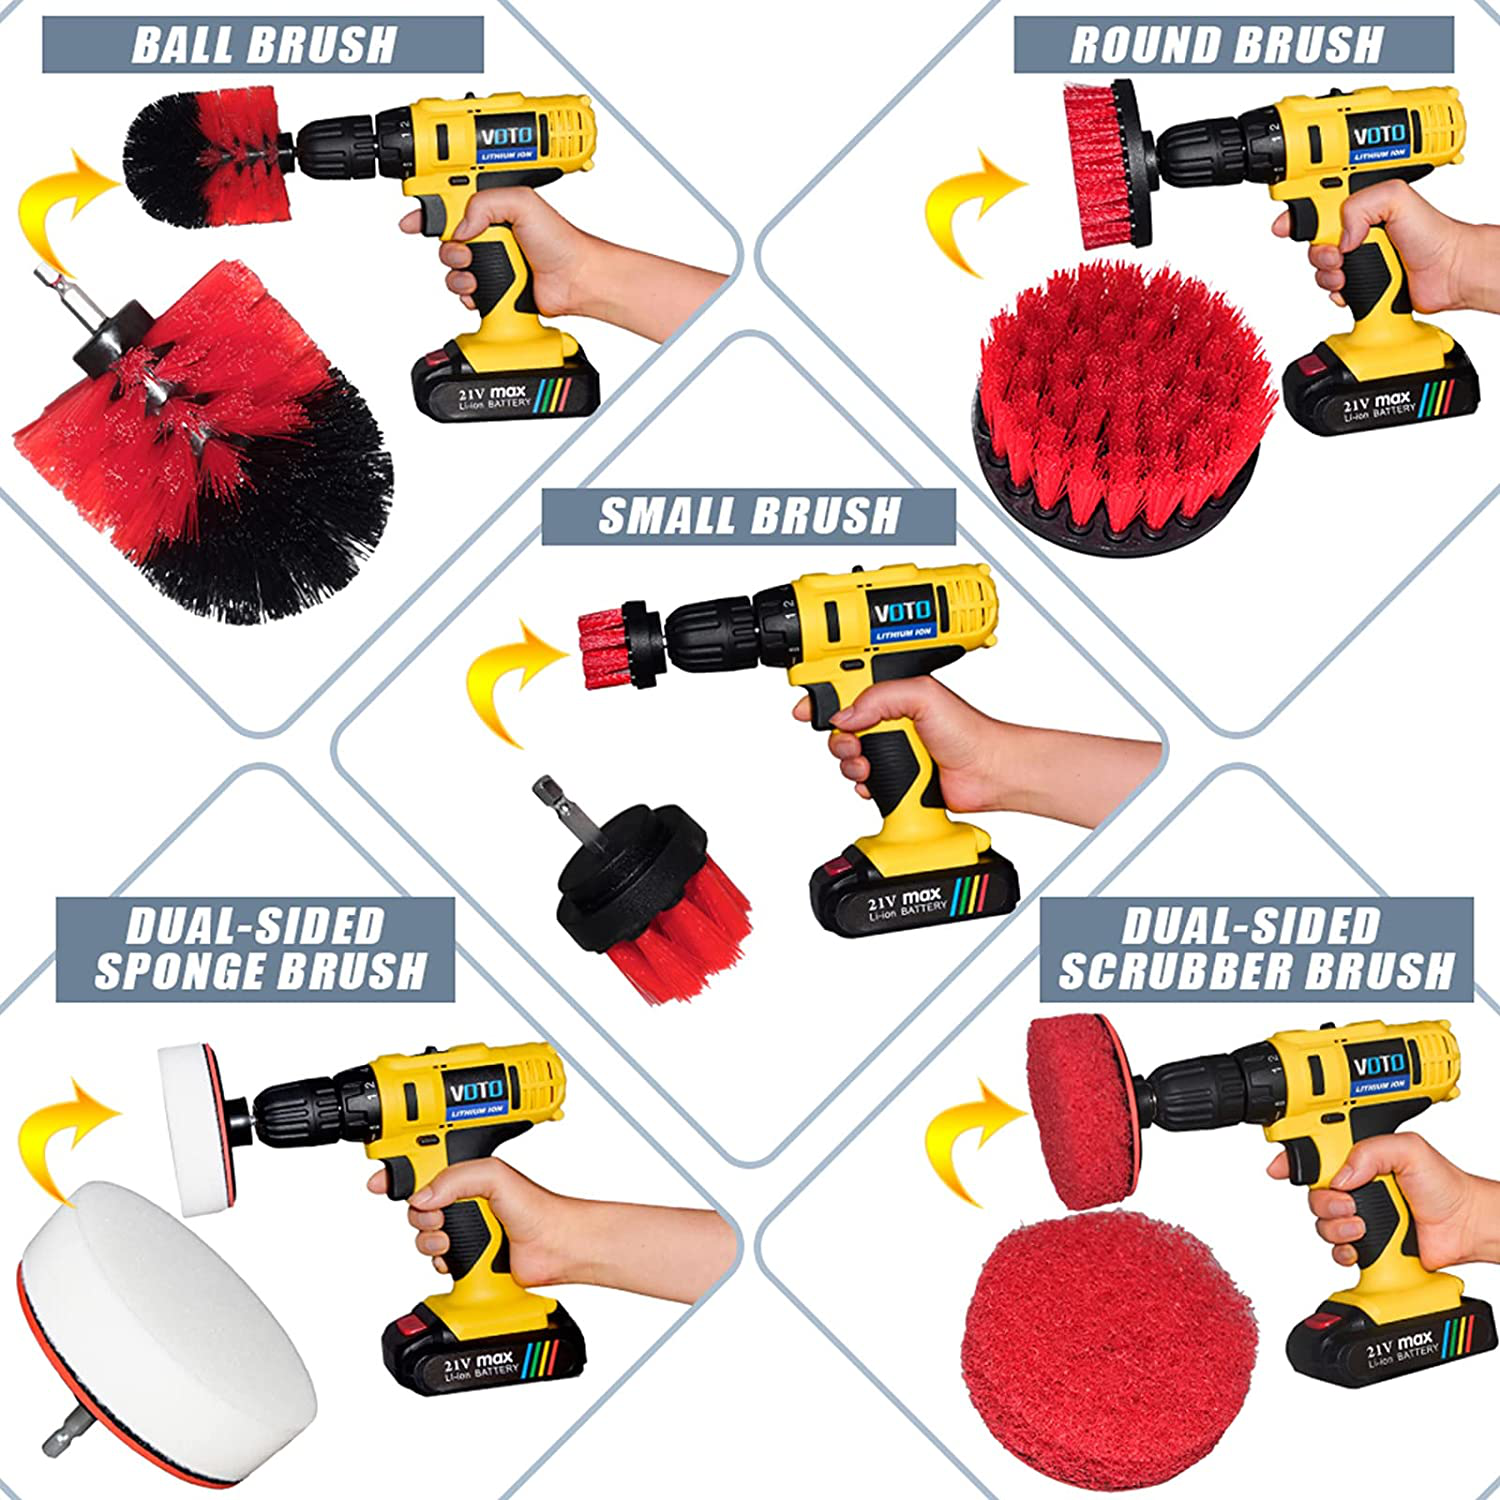 12 Pcs Car Cleaning Tools Kit with 4x Car Detailing Brush and Scrub Brush, Drill Cleaning Brush Attachment, Car Cleaning Tools for Cleaning Wheels,Rims,Tires, Interior, Exterior,Air Vents,Dashboard